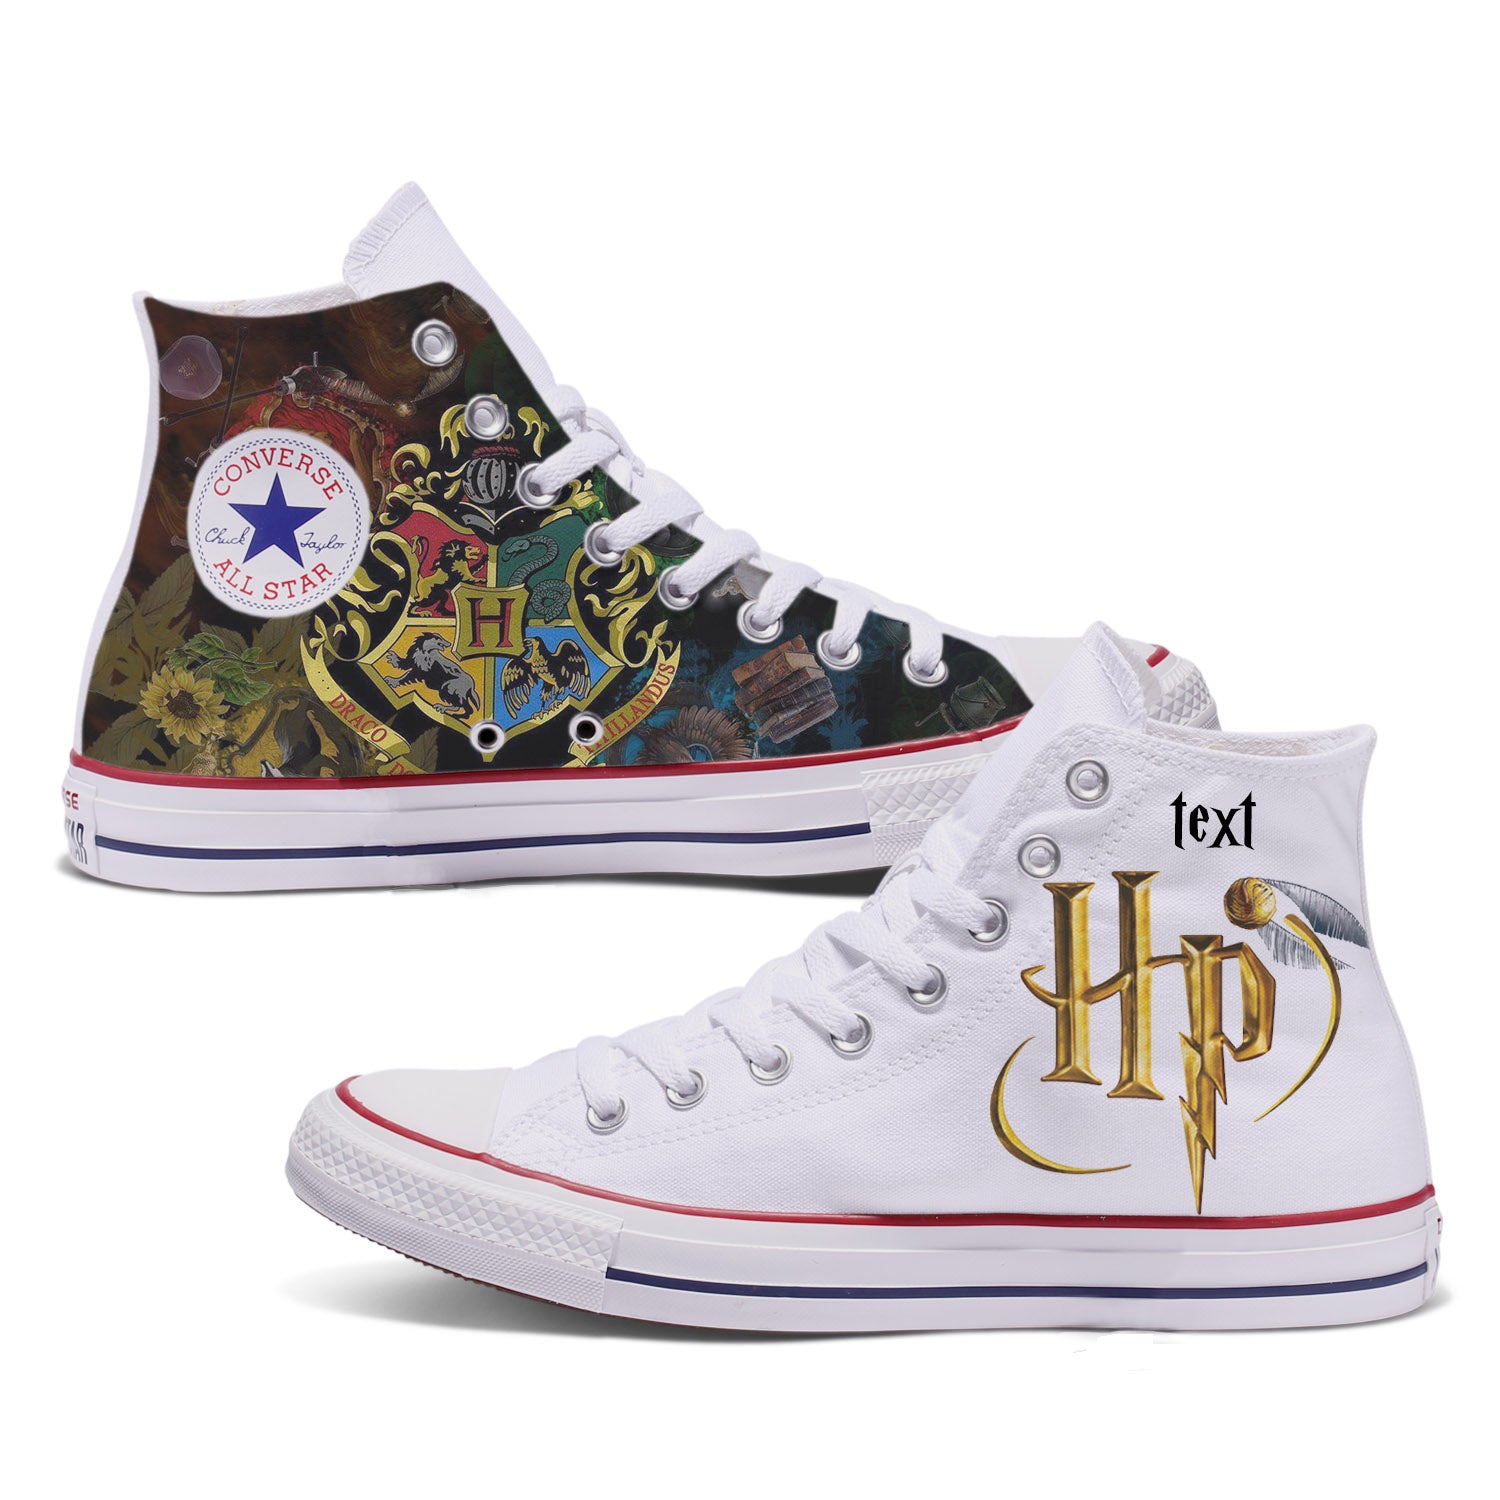 harry potter inspired converse